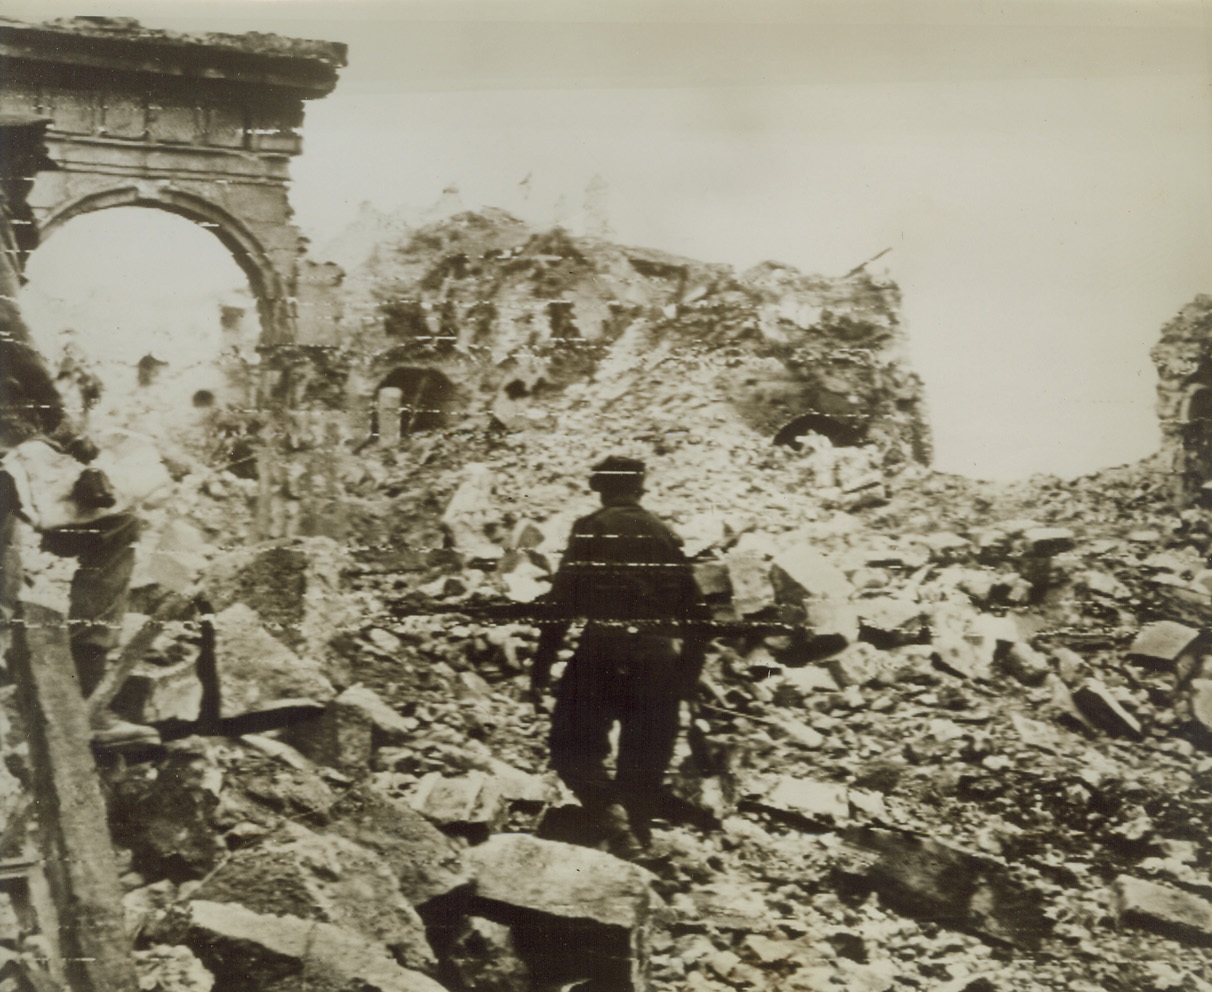 Ruins of Cassino Abbey, 5/24/1944. This photo, flashed to the U.S. by Radiotelephoto today, shows an Allied Eighth Army soldier carefully making his way through the shattered ruins of the once-beautiful Benedictine Abbey on a mountain top overlooking the city of Cassino, Italy. The Abbey were Germans emplaced heavy guns to fire on the Allies besieging Cassino, has been the scene of some of the bitterest fighting of the Italian Campaign. It was blasted by tons of bombs from USAAF planes, and shattered by Allied Artillery shells until only a heap of rubble remains. Credit: ACME photo via ARMY RADIOTELEPHOTO.;